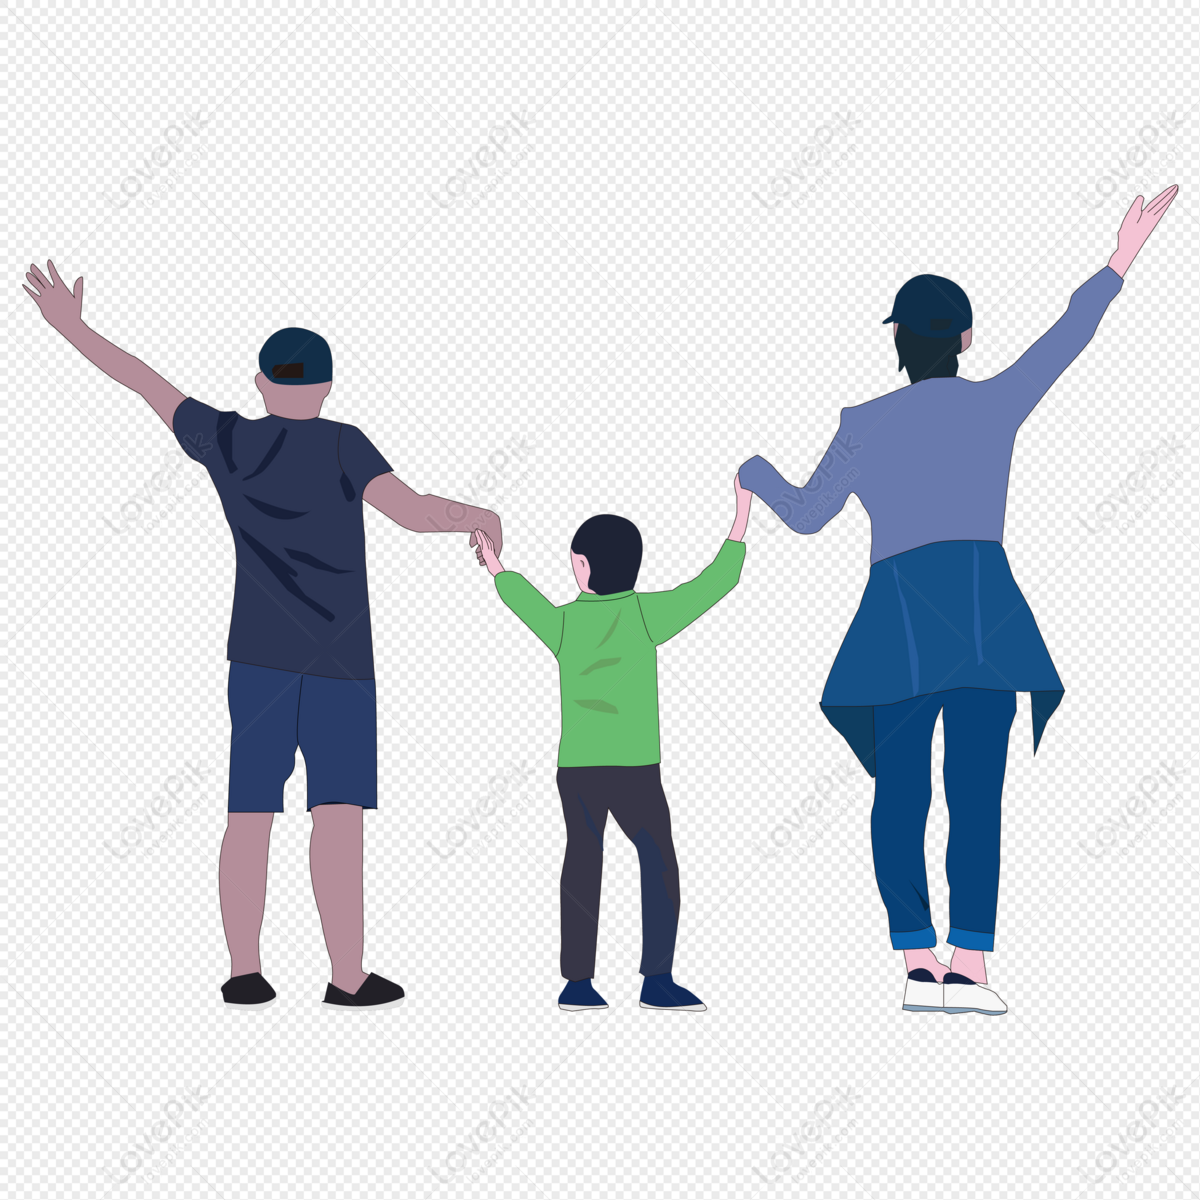 Cartoon Hand Drawn Character Family Three Back View Free PNG And Clipart  Image For Free Download - Lovepik | 401335559